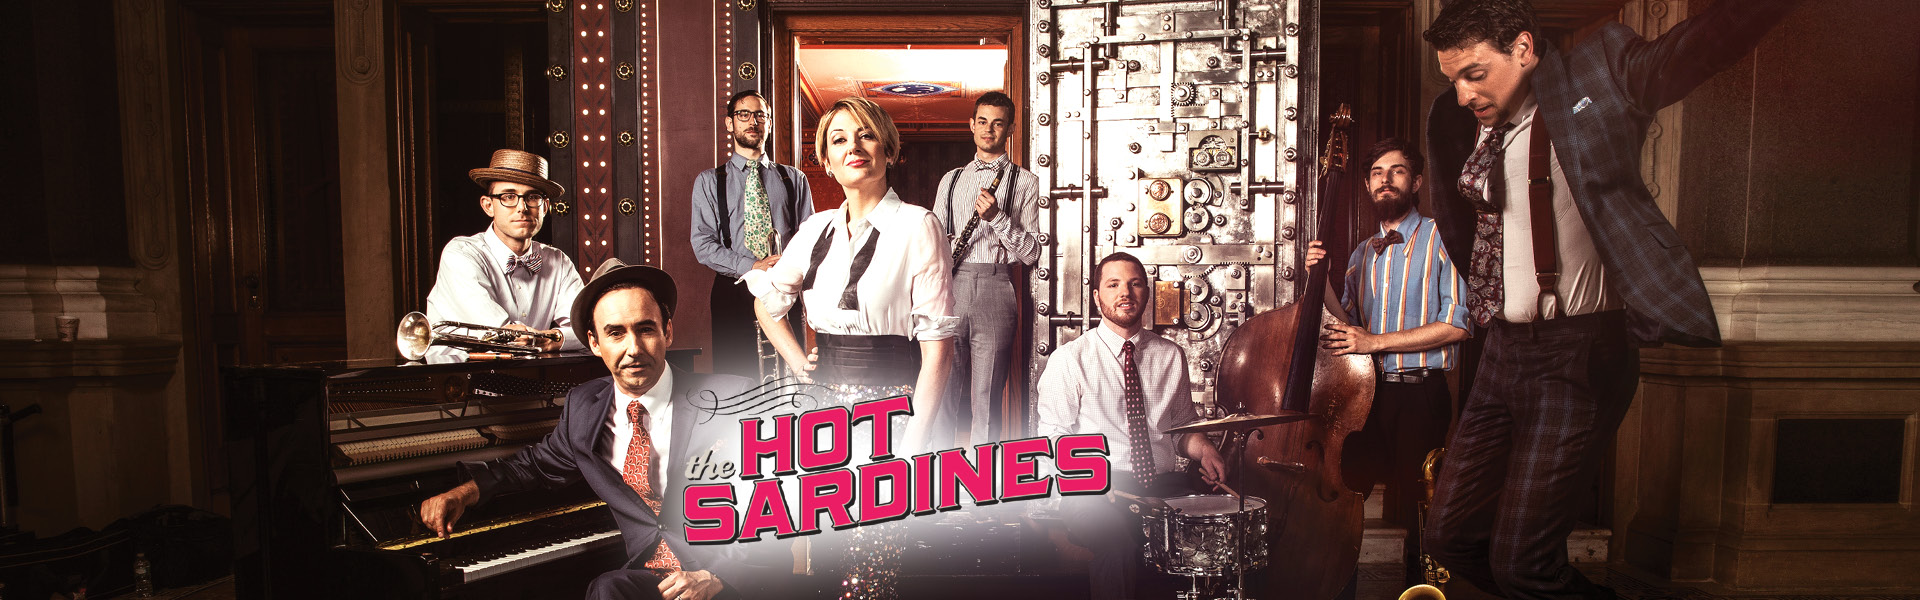 Picture of music group The Hot Sardines